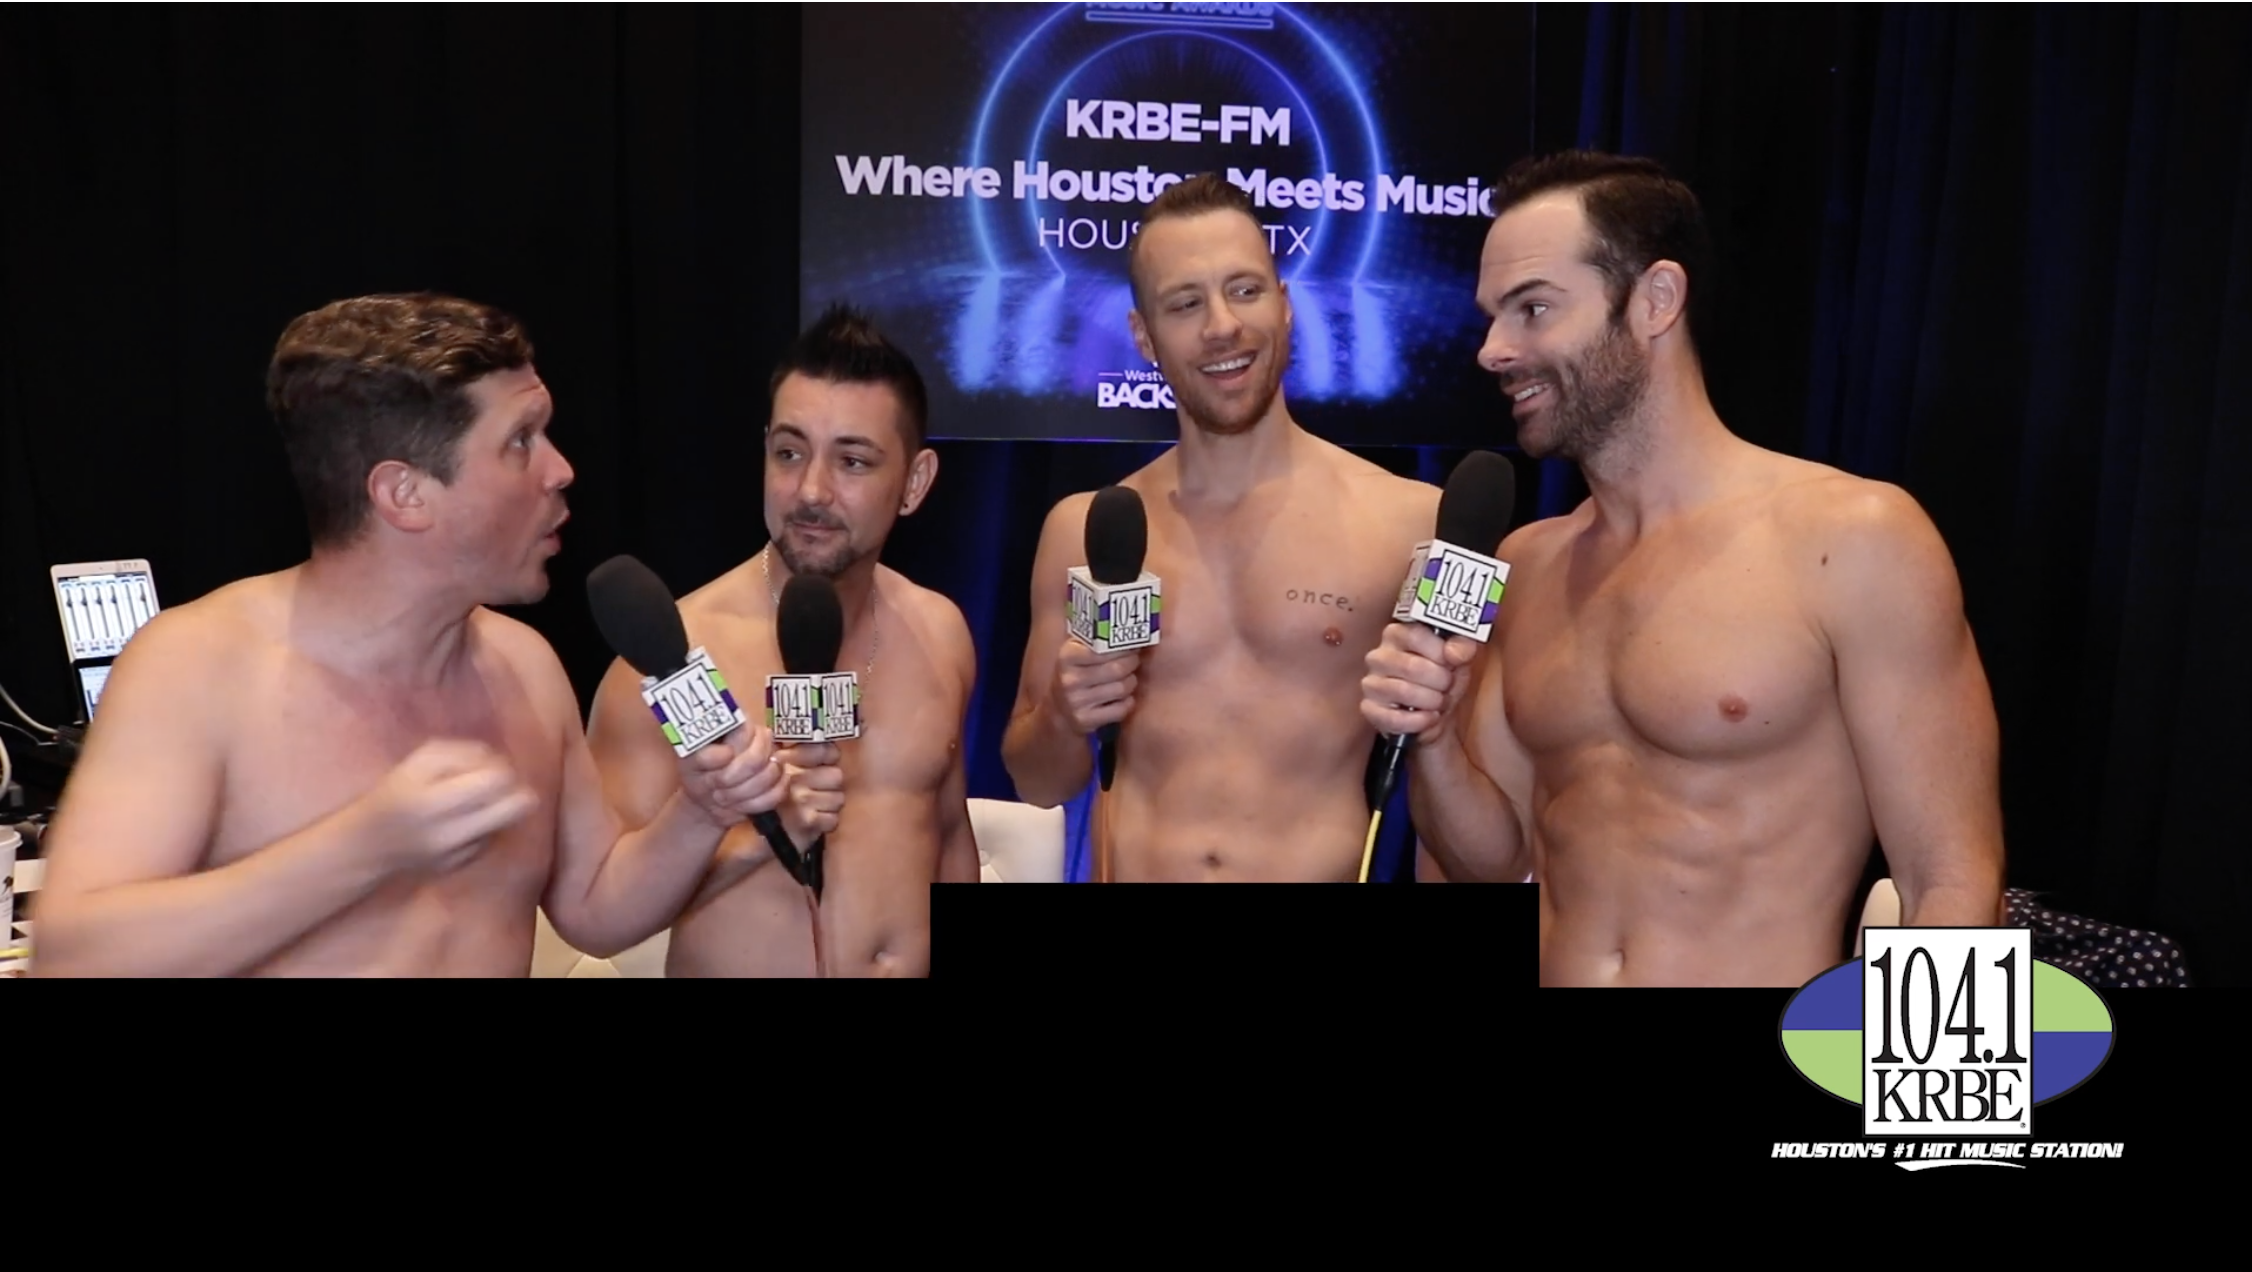 Special K & Kevin Quinn interview the Naked Magicians at the 2019 BBMAs